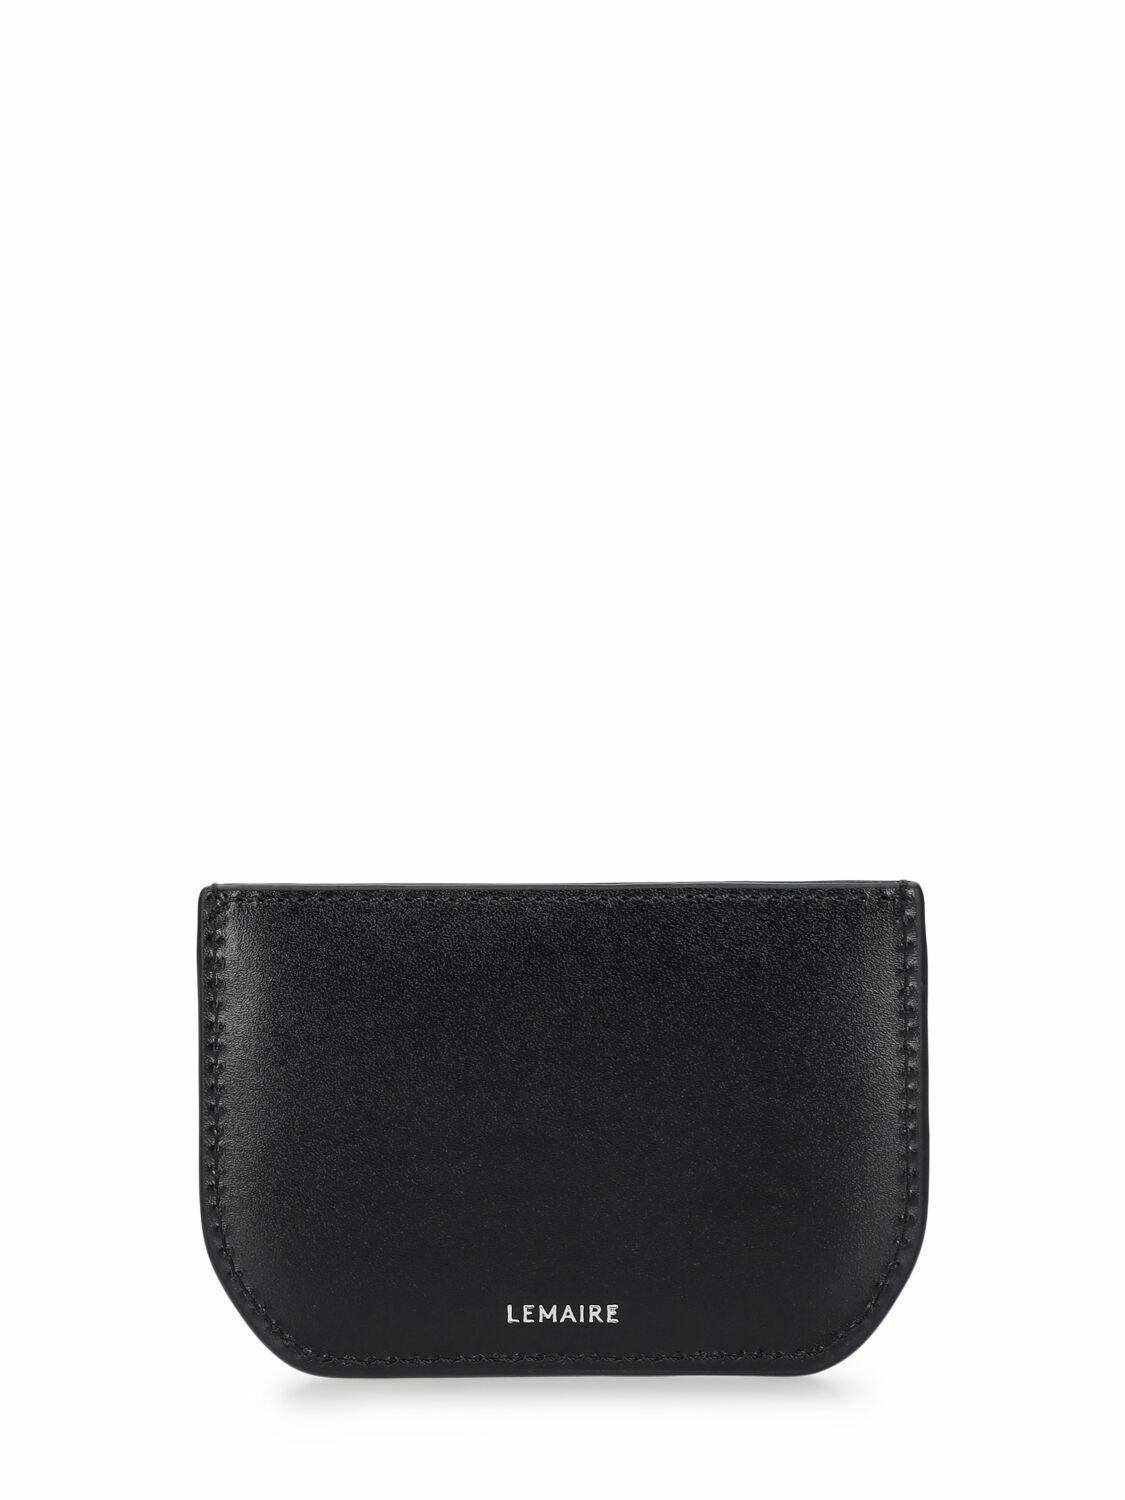 Photo: LEMAIRE Calepin Leather Card Holder